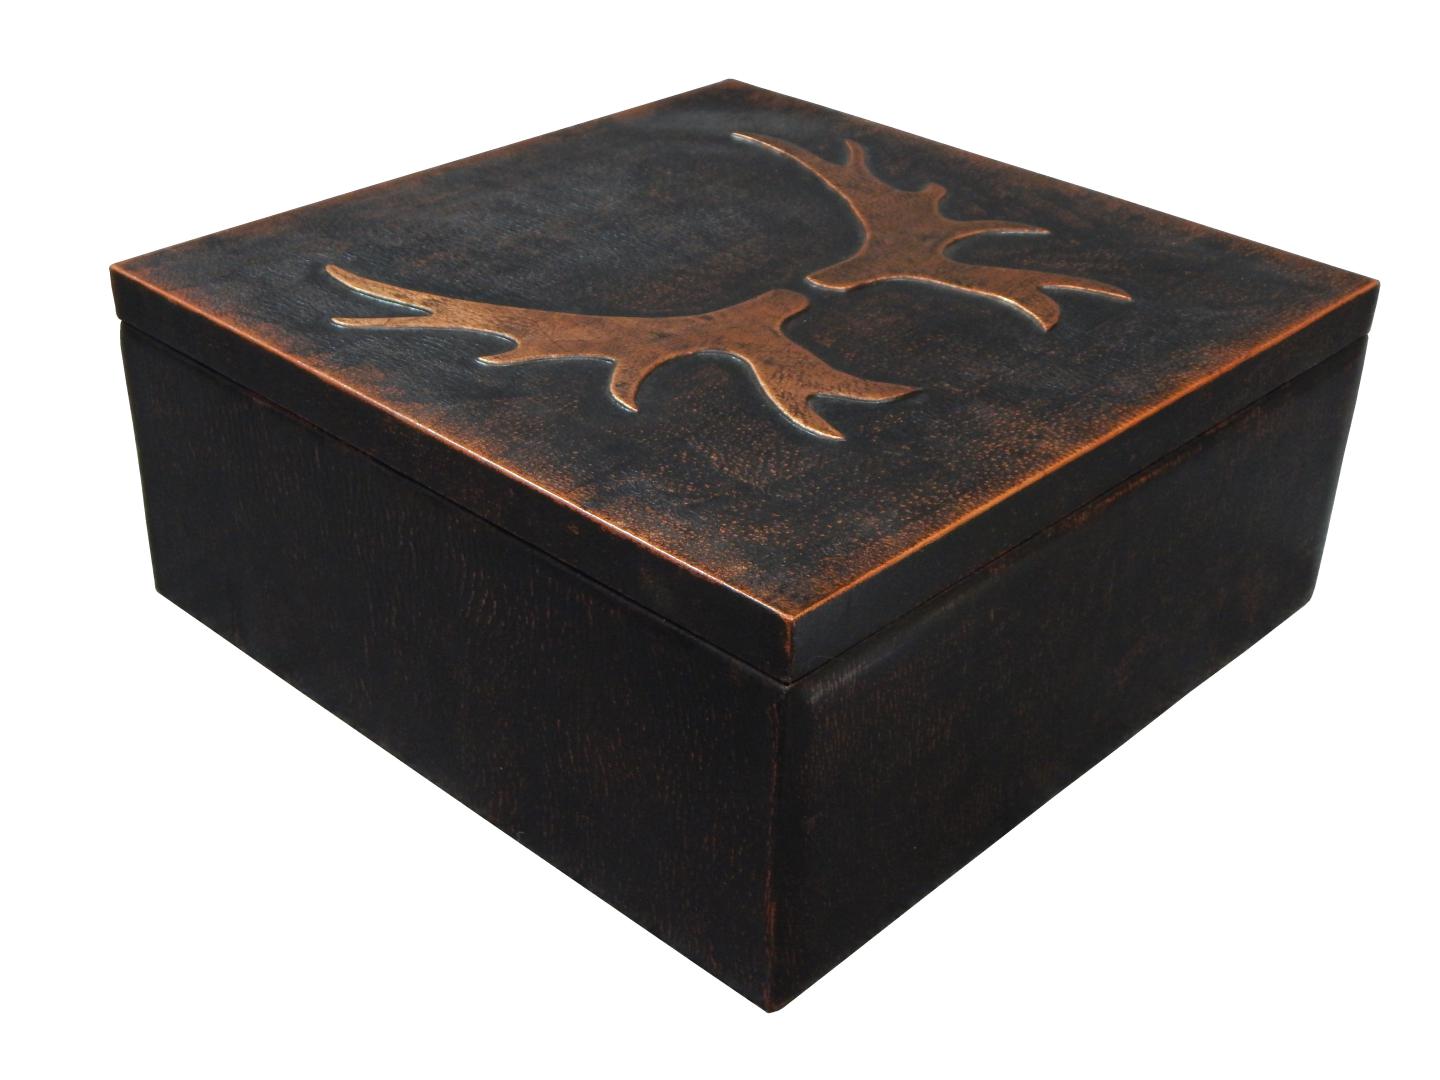 leather box with an antler moose horns design on high relief on the top